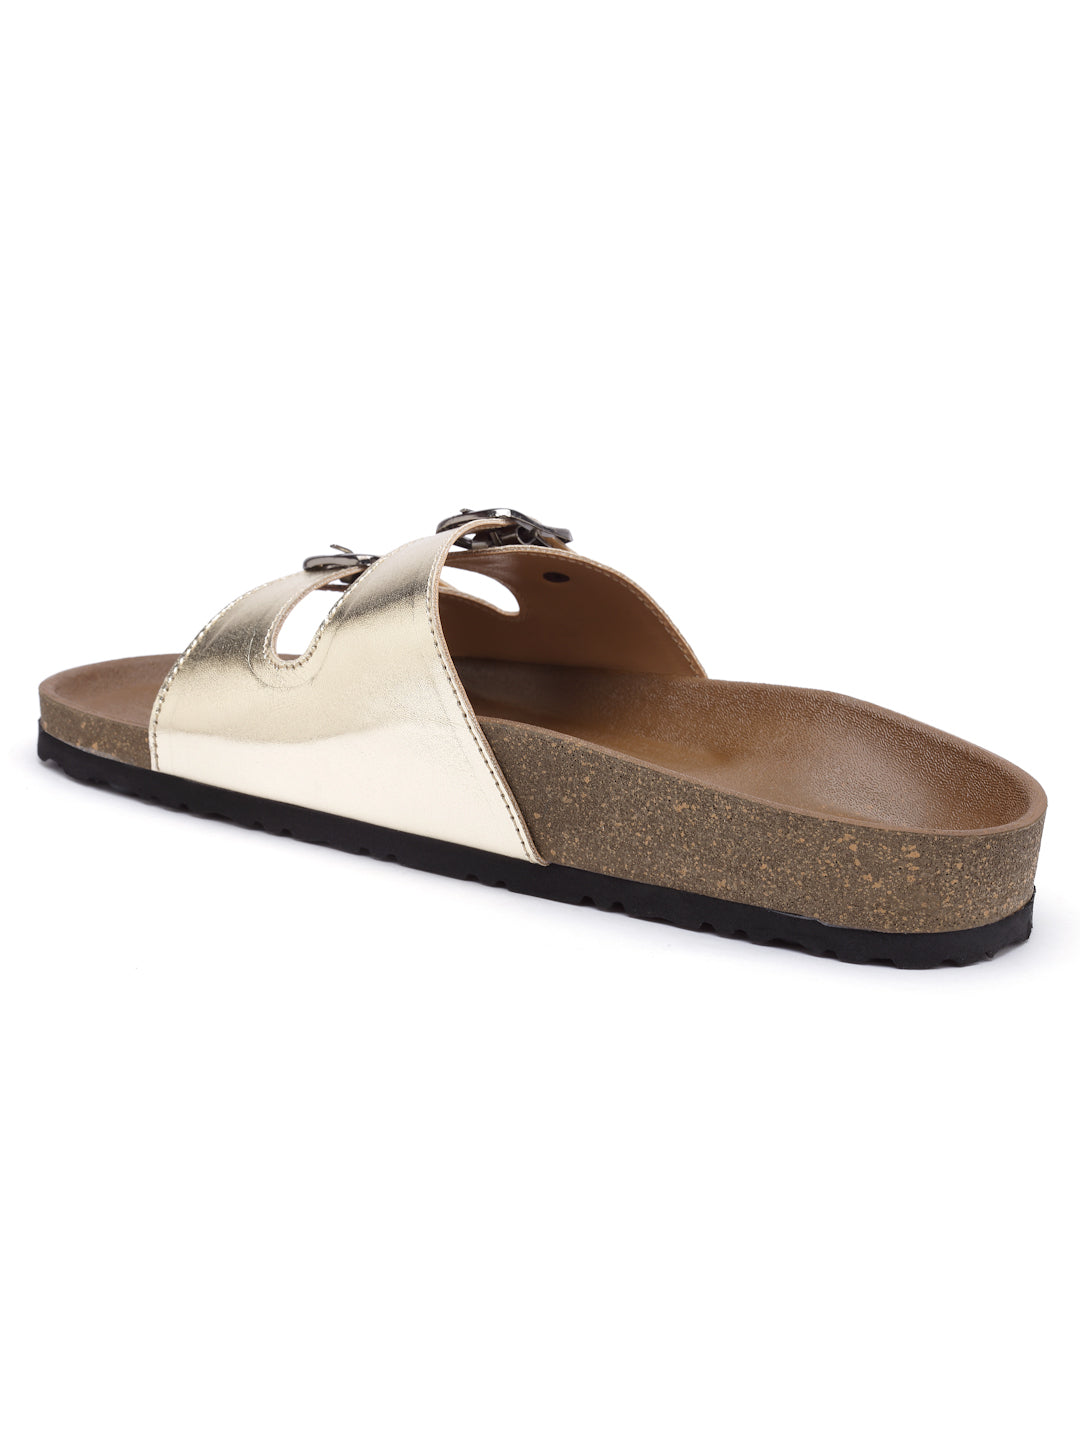 Women's Gold Synthetic Leather Casual Sandal